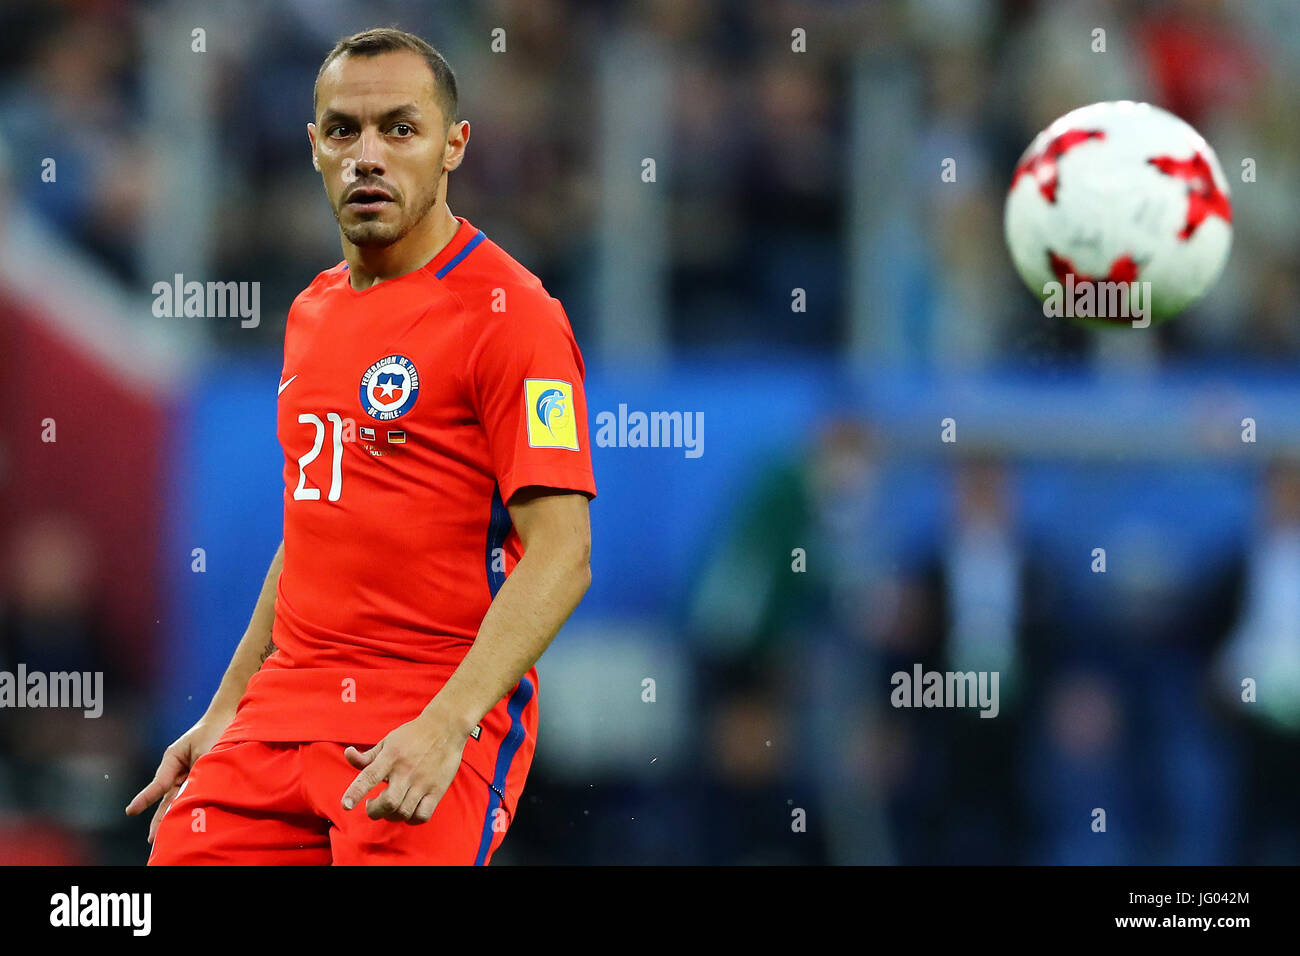 St. Petersburg, Russia. 2nd July, 2017. Marcelo Diaz of Chile during Chile-Germany match valid for the 2017 Confederations Cup Final this Sunday (02), held at the Krestovsky Stadium (Zenit Arena) in St. Petersburg, Russia. (Photo: Heuler Andrey/DiaEsportivo/Fotoarena) Stock Photo